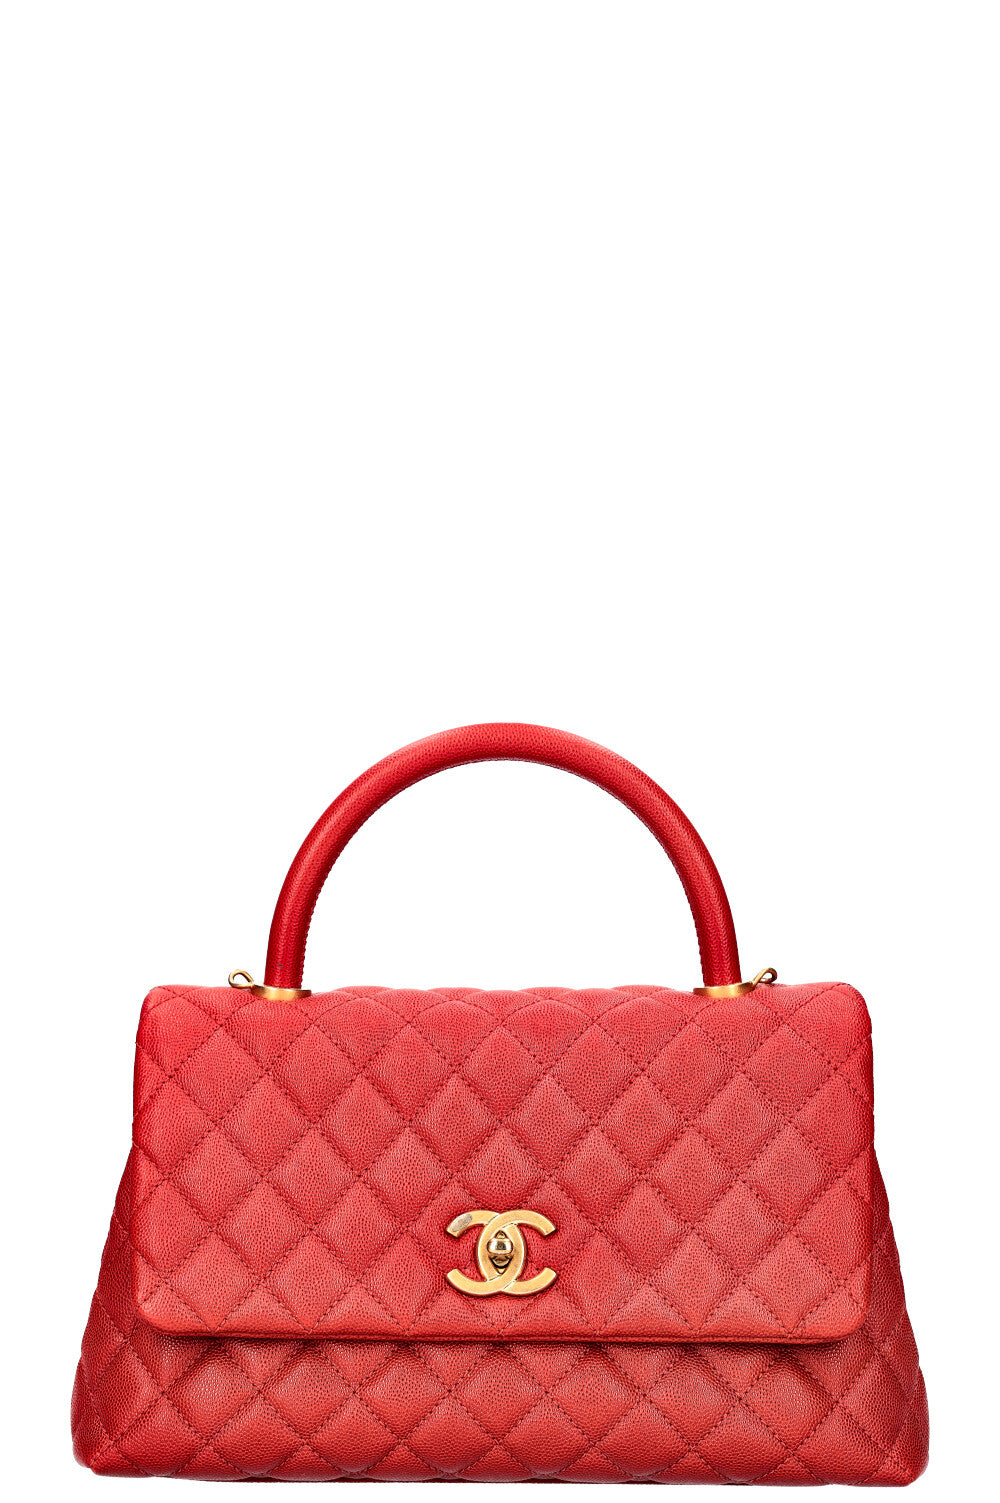 CHANEL Coco Handle Bag Red Caviar Leather